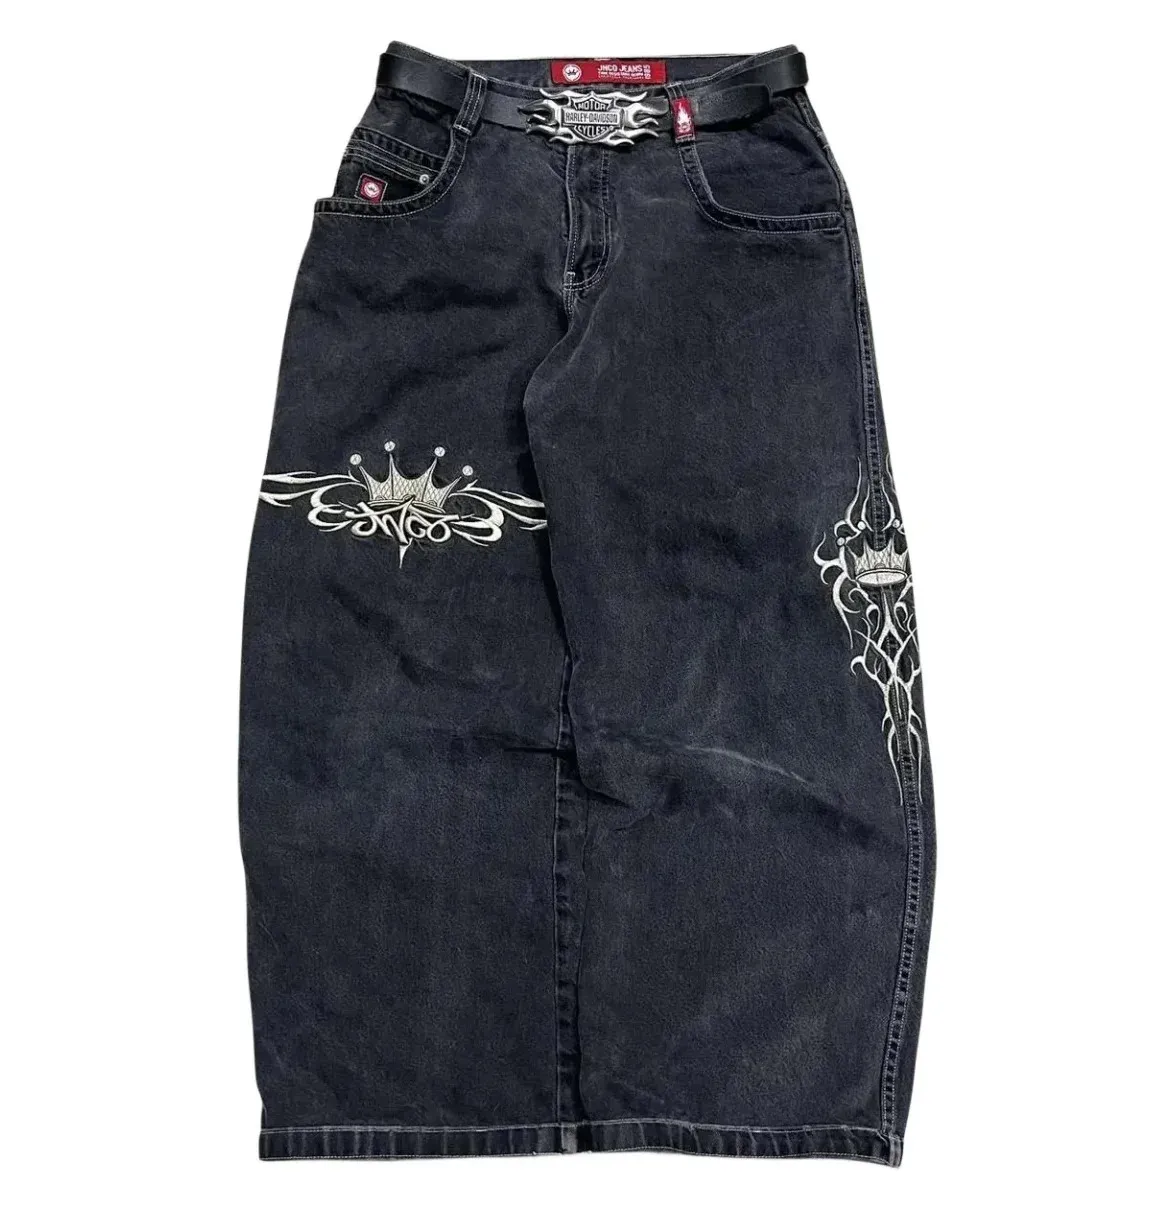 JNCO Jeans Mens Harajuku Retro Hop Hop Skull Embroidery Baggy Jeans Denim Pants 90s Street Gothic Wide Wide Wear 231221